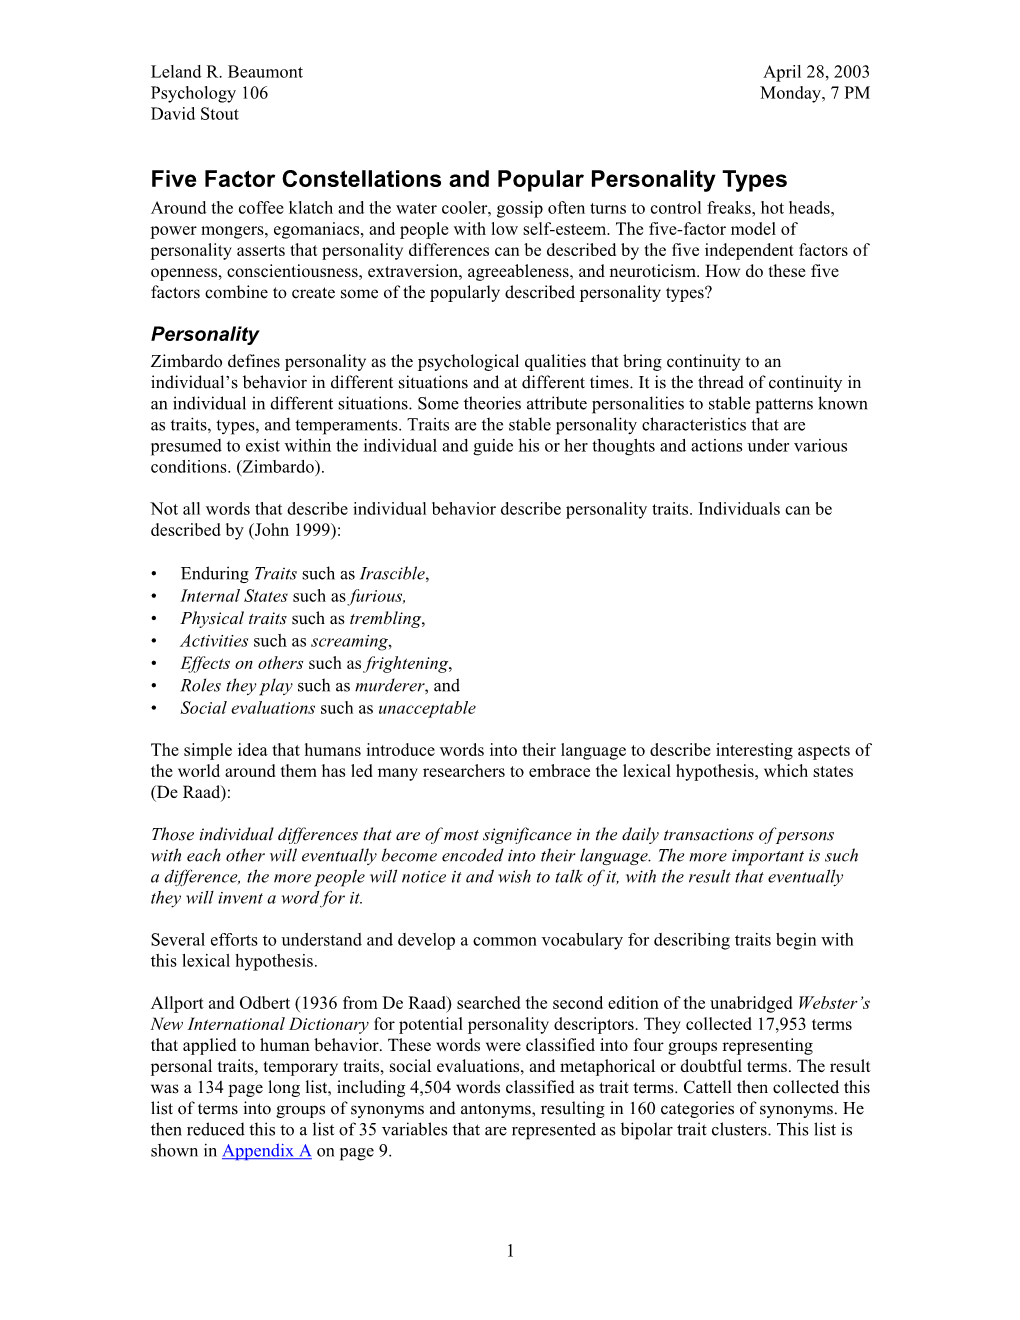 Five Factor Constellations and Popular Personality Types